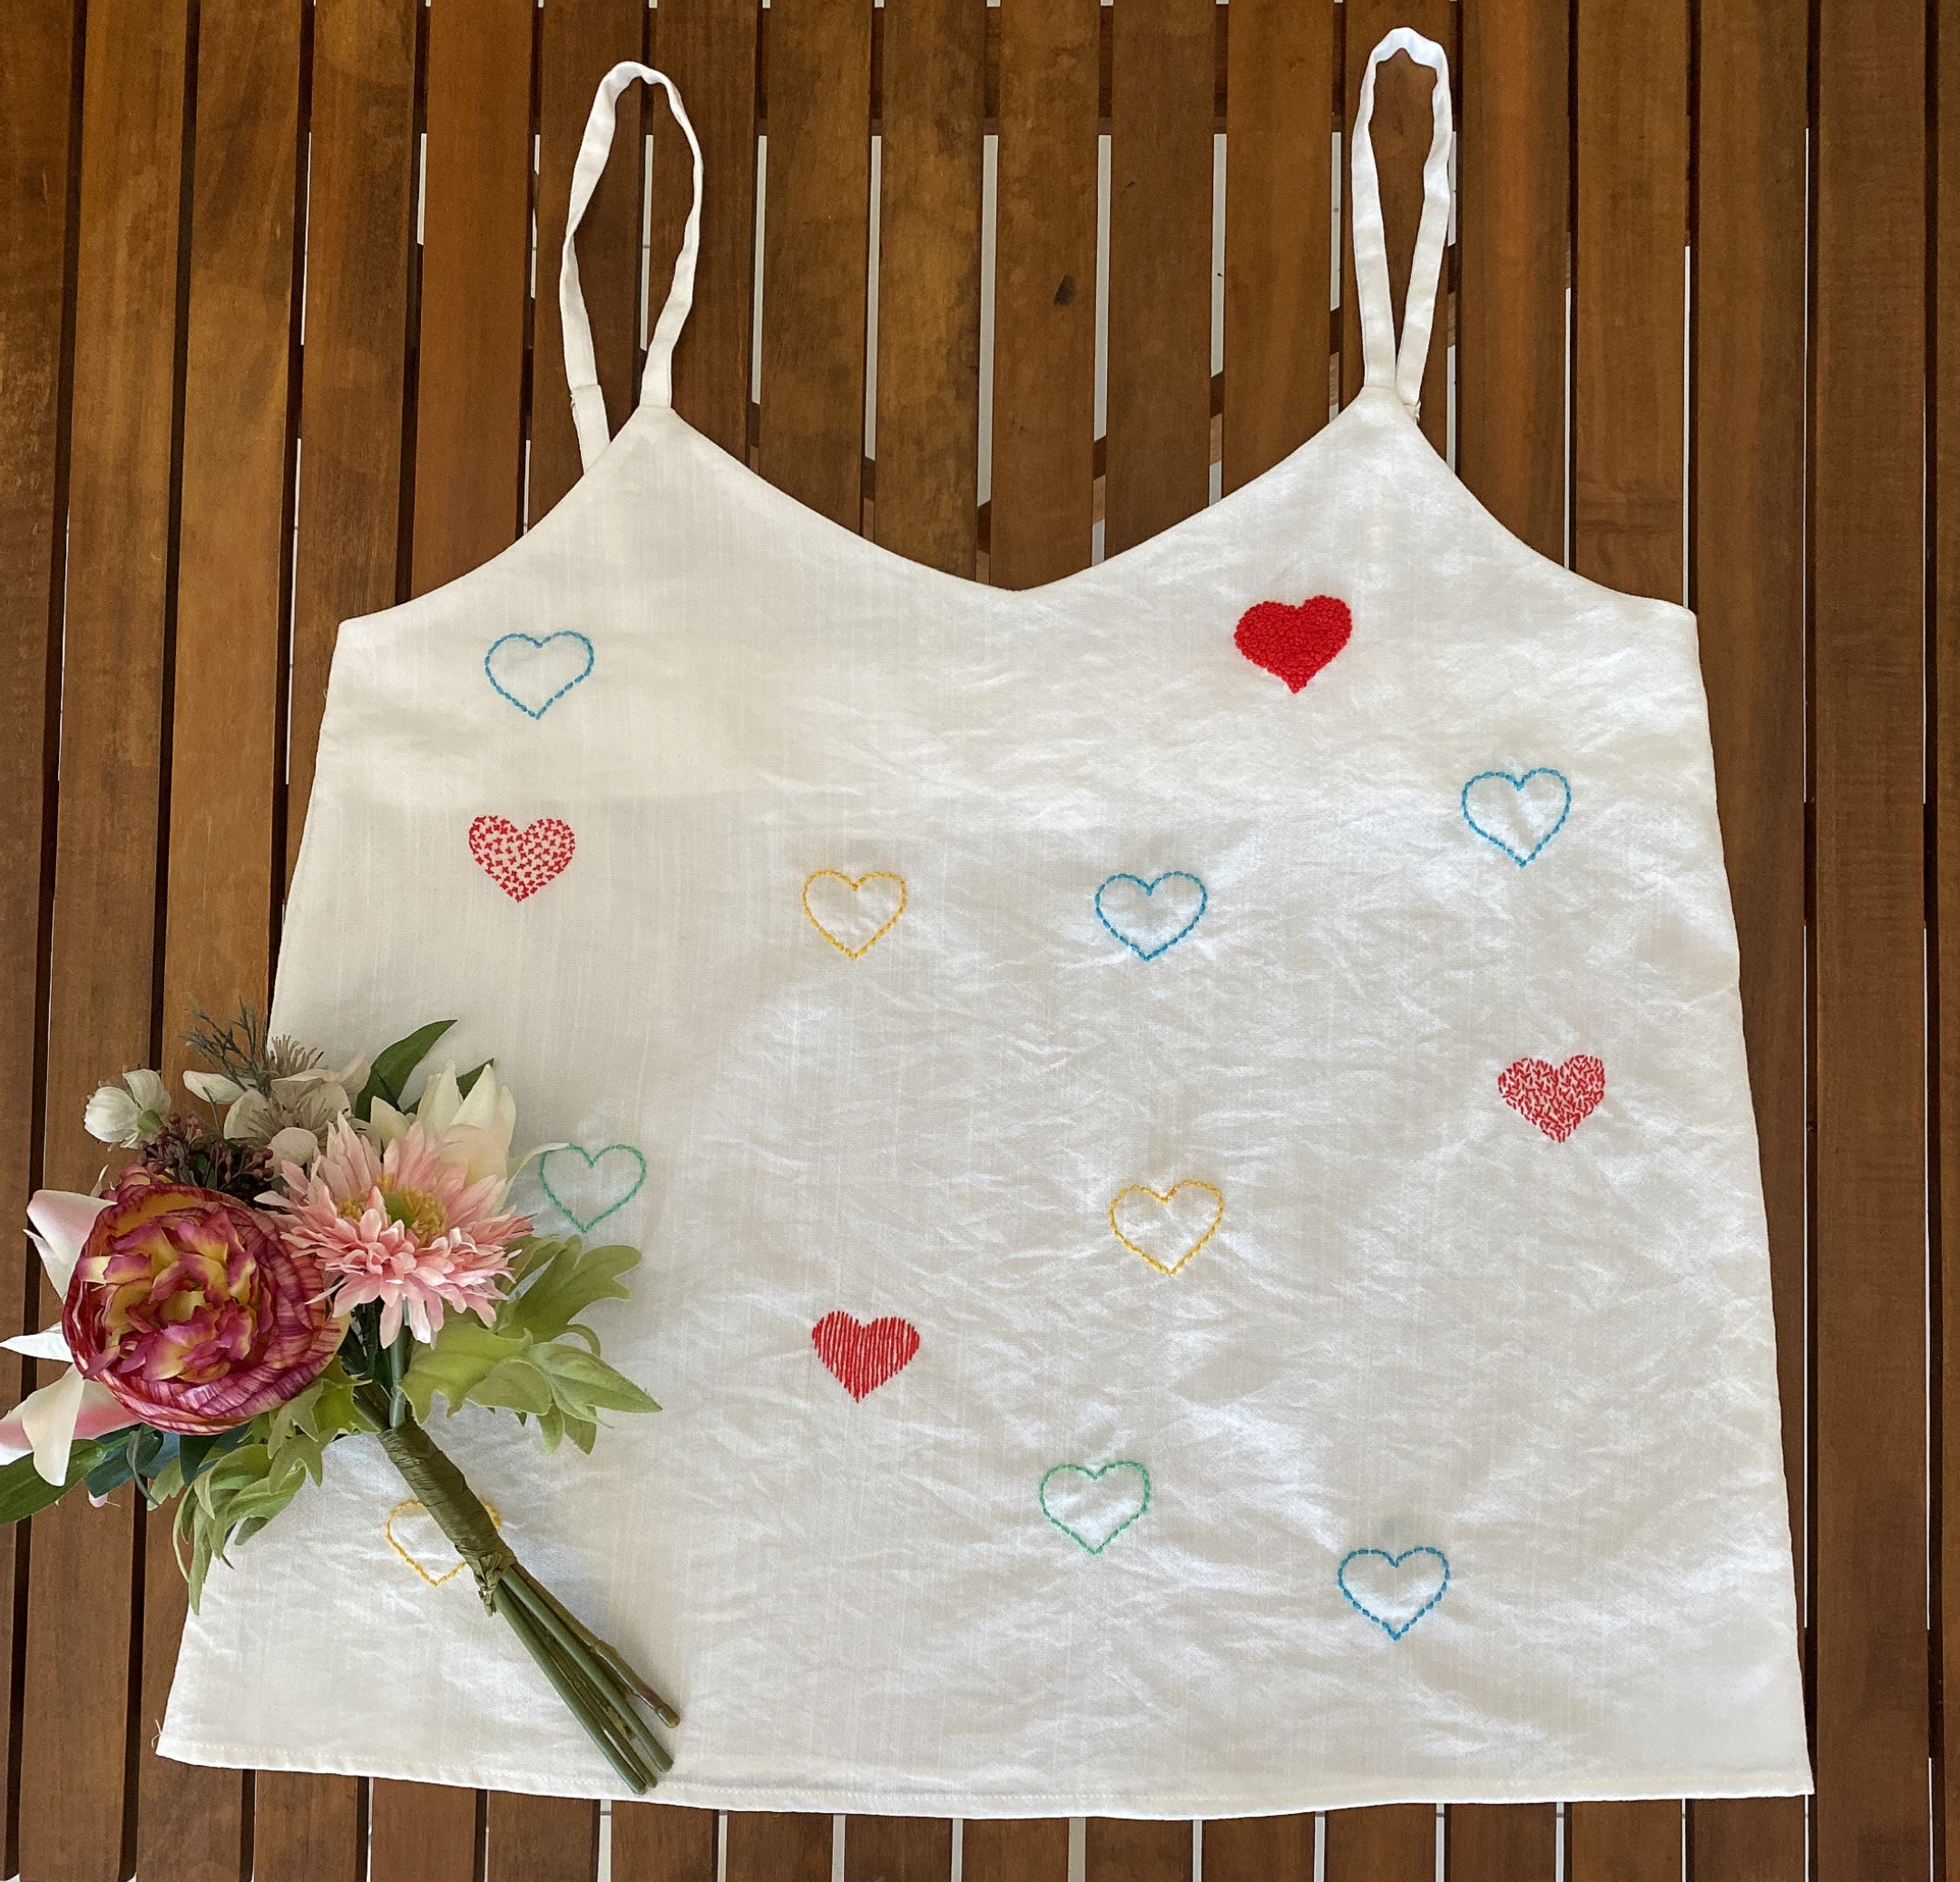 Embroidered Cami /summer Top/ PDF Sewing Pattern. Size: XS